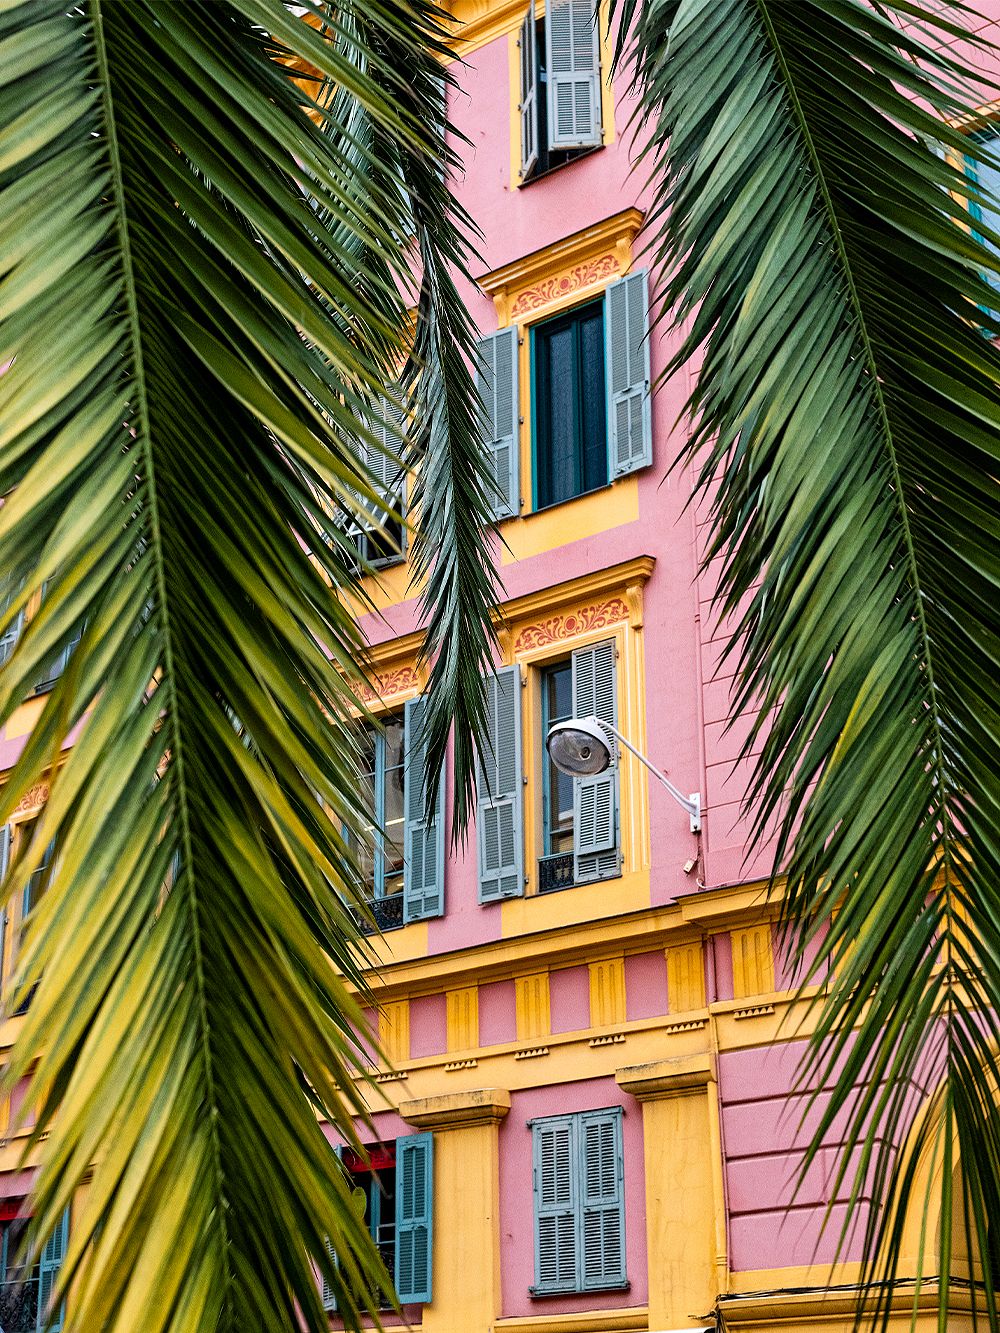 Colorful buildings in Le Port, Nice